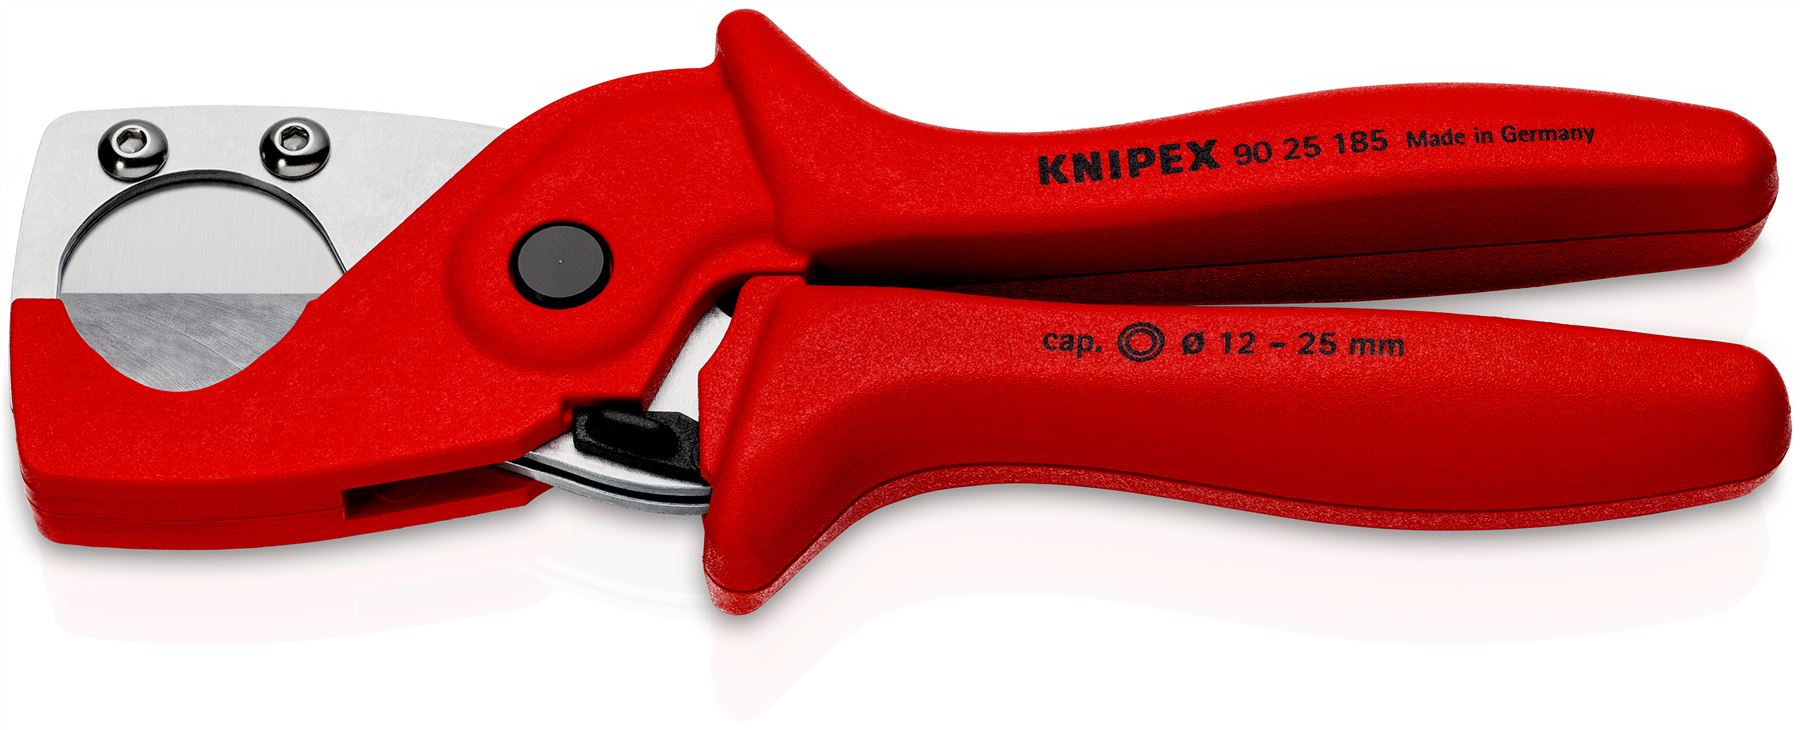 Knipex Plastic Pipe Cutters for Composite Pipes 185mm 90 25 185